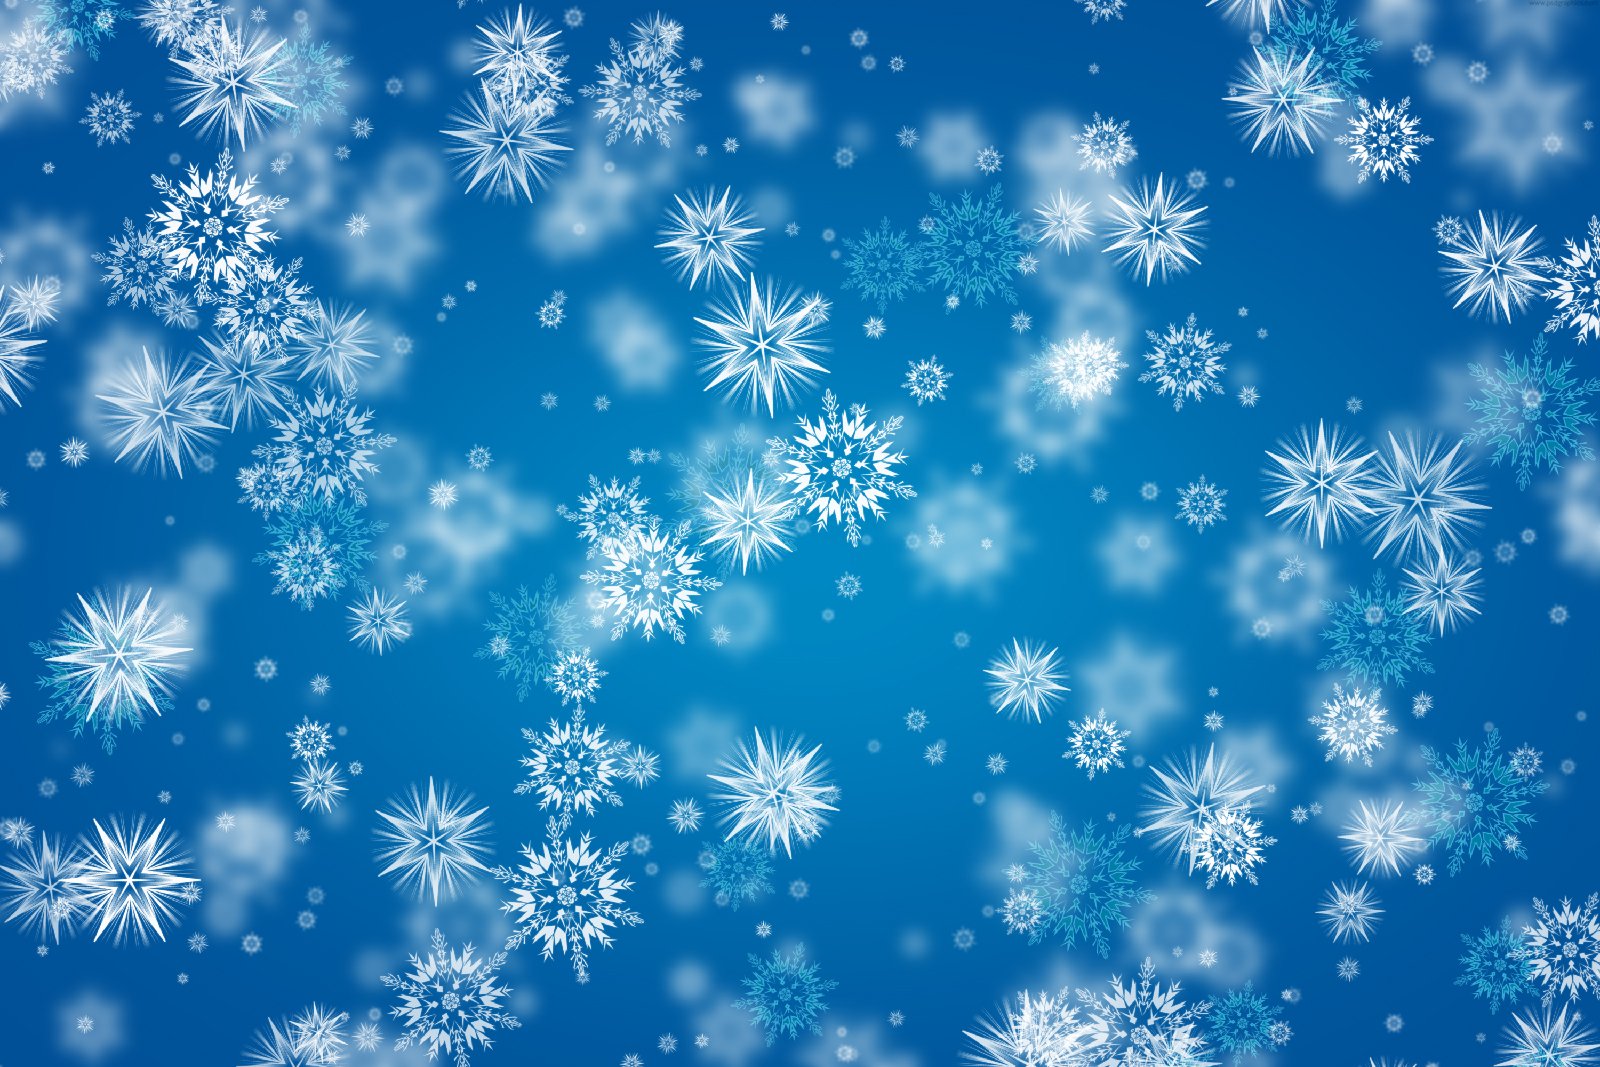 Blue winter snowflakes background PSD